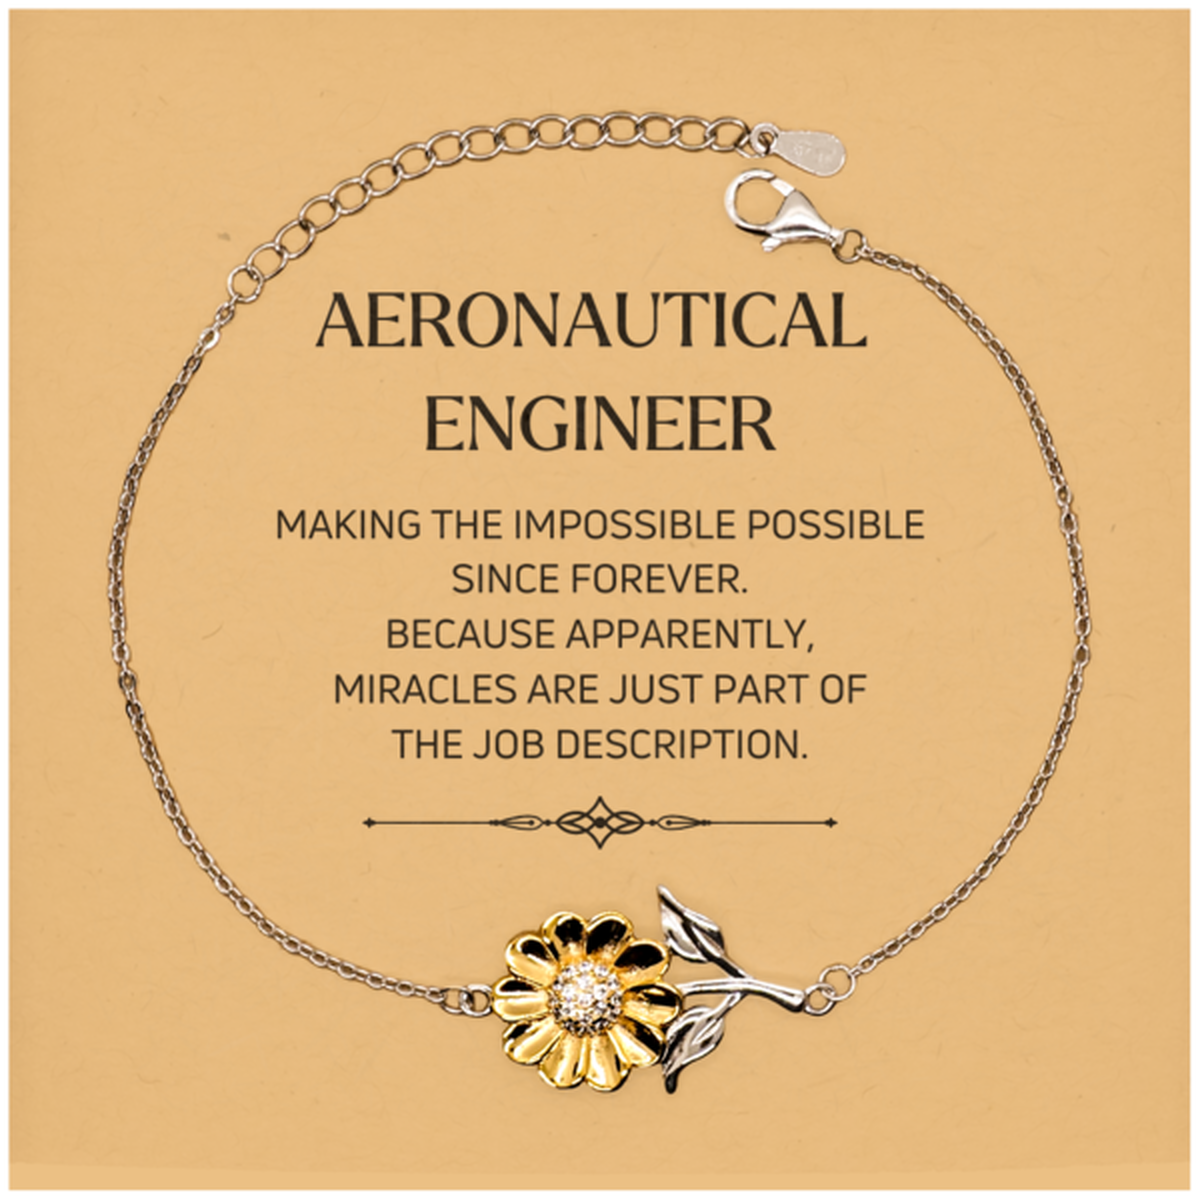 Funny Aeronautical Engineer Gifts, Miracles are just part of the job description, Inspirational Birthday Christmas Sunflower Bracelet For Aeronautical Engineer, Men, Women, Coworkers, Friends, Boss